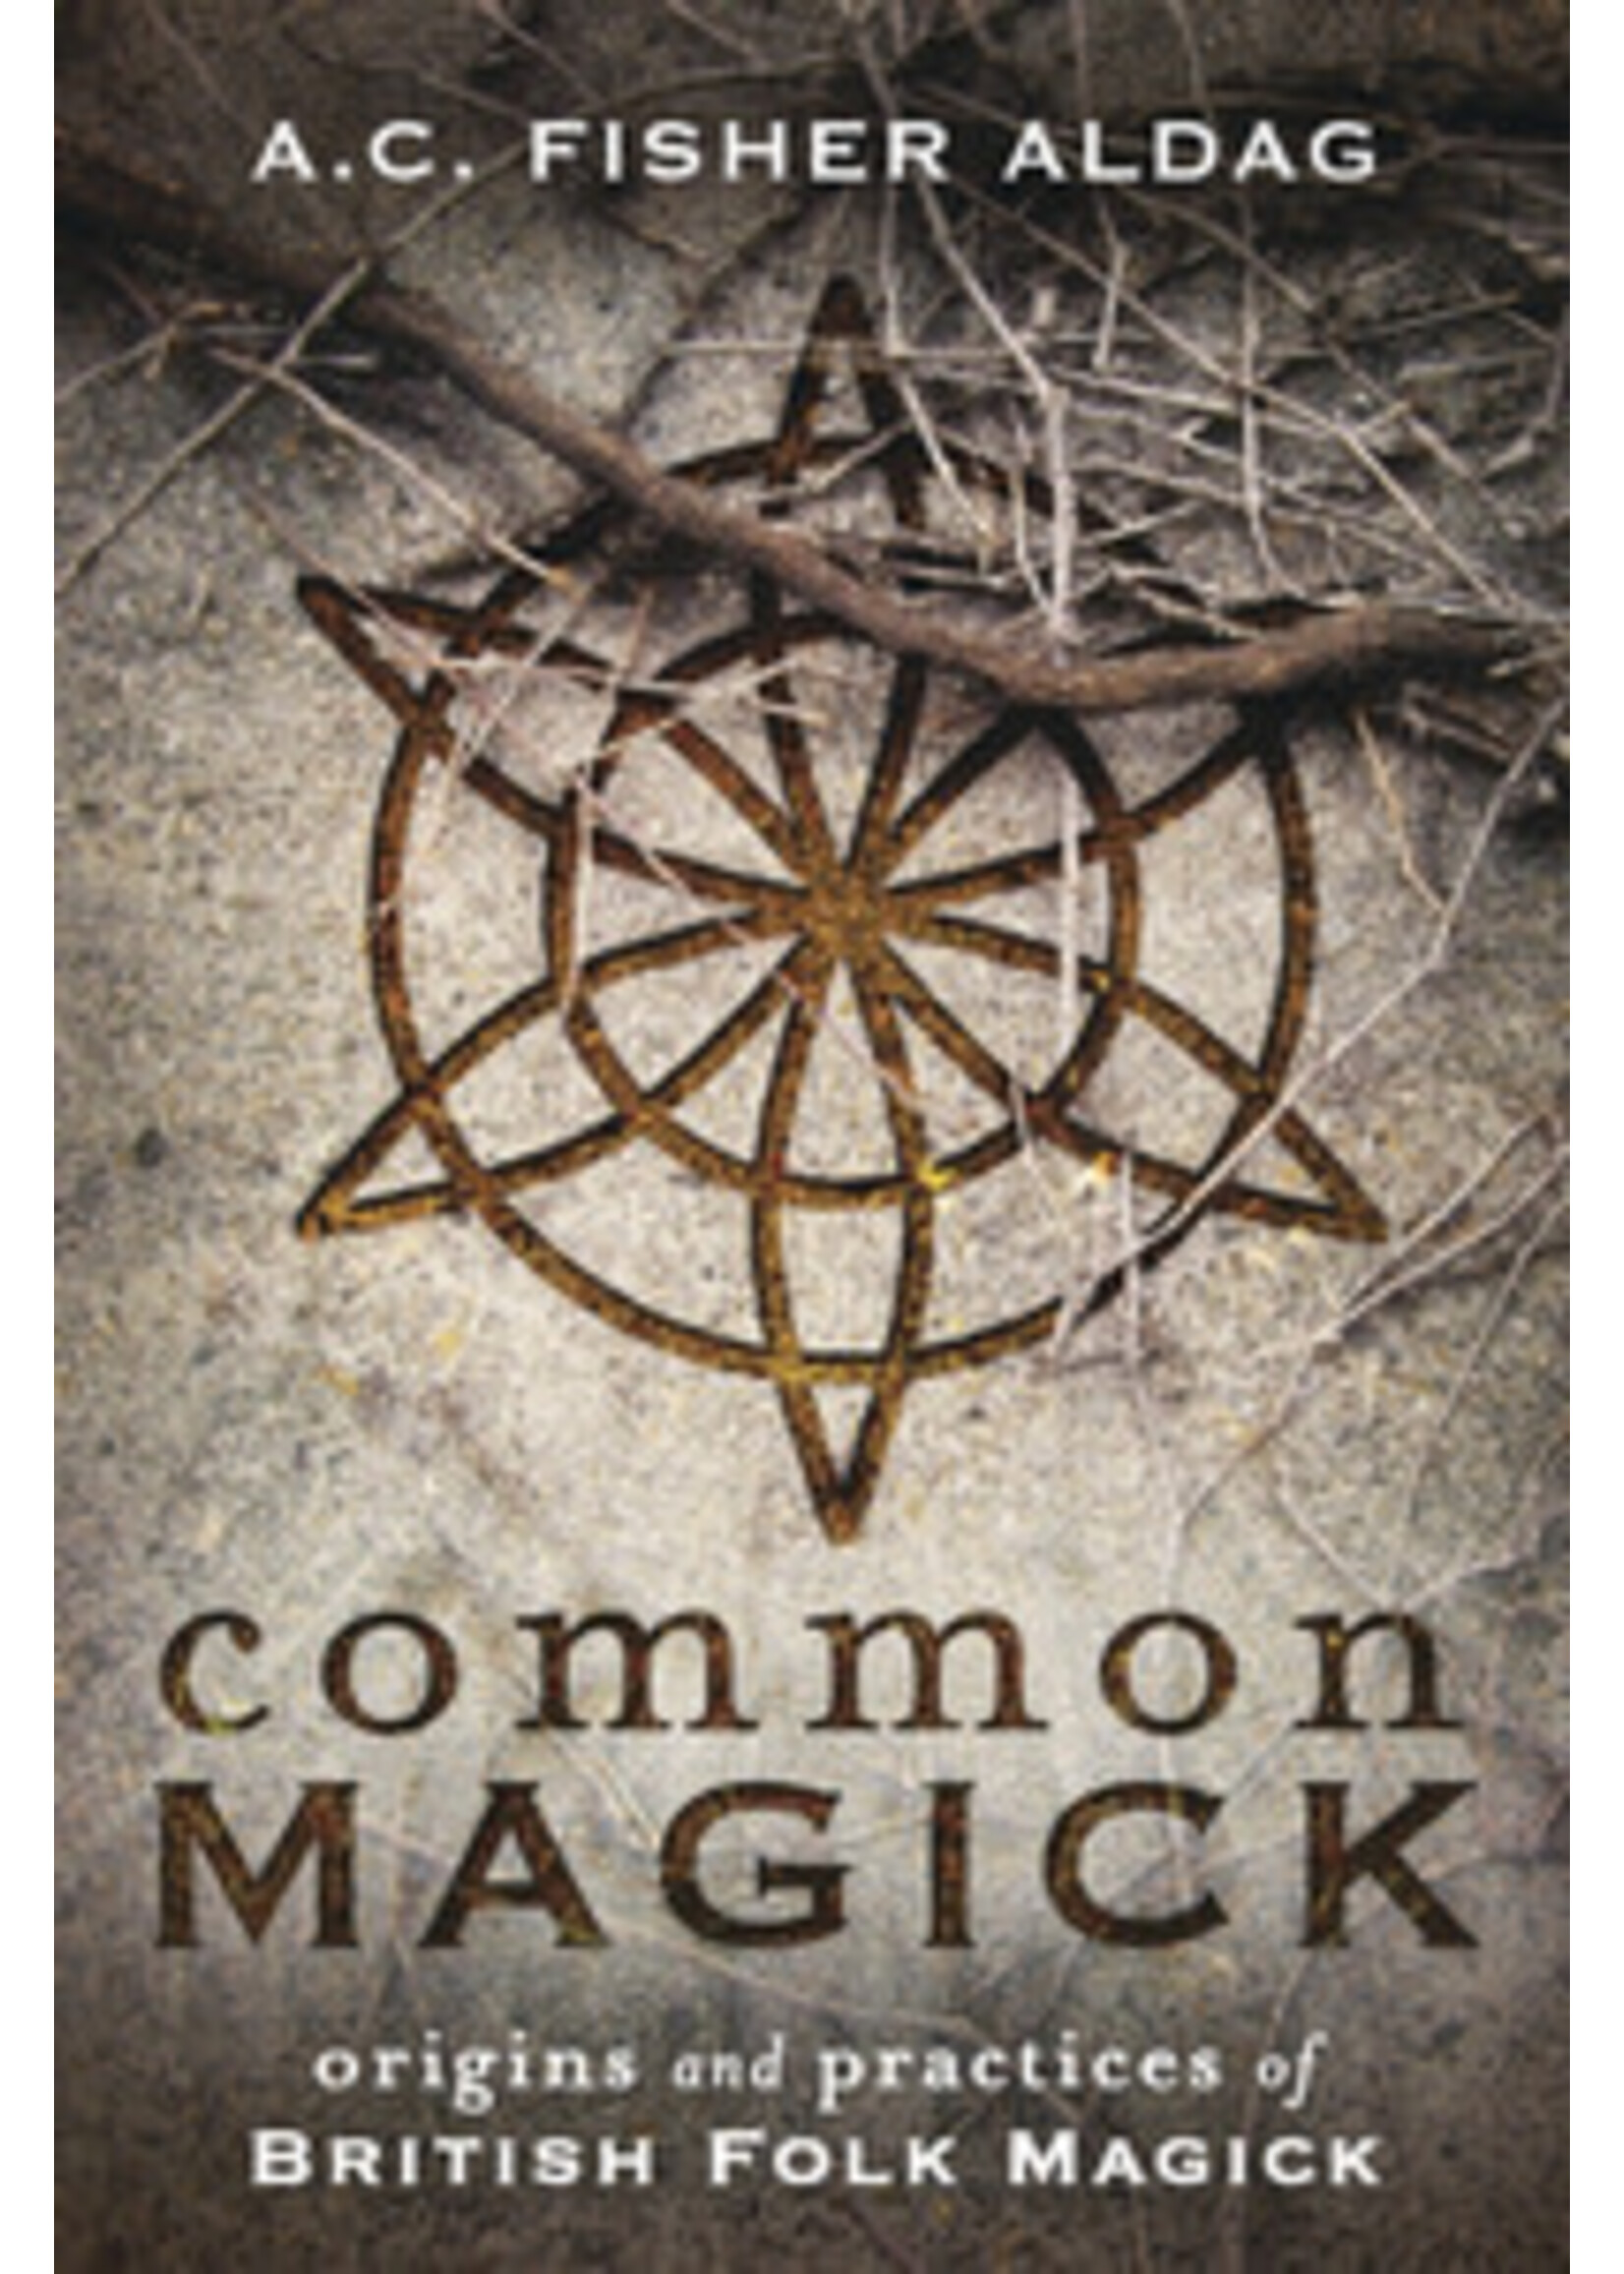 Common Magick by A. C. Fisher Aldag